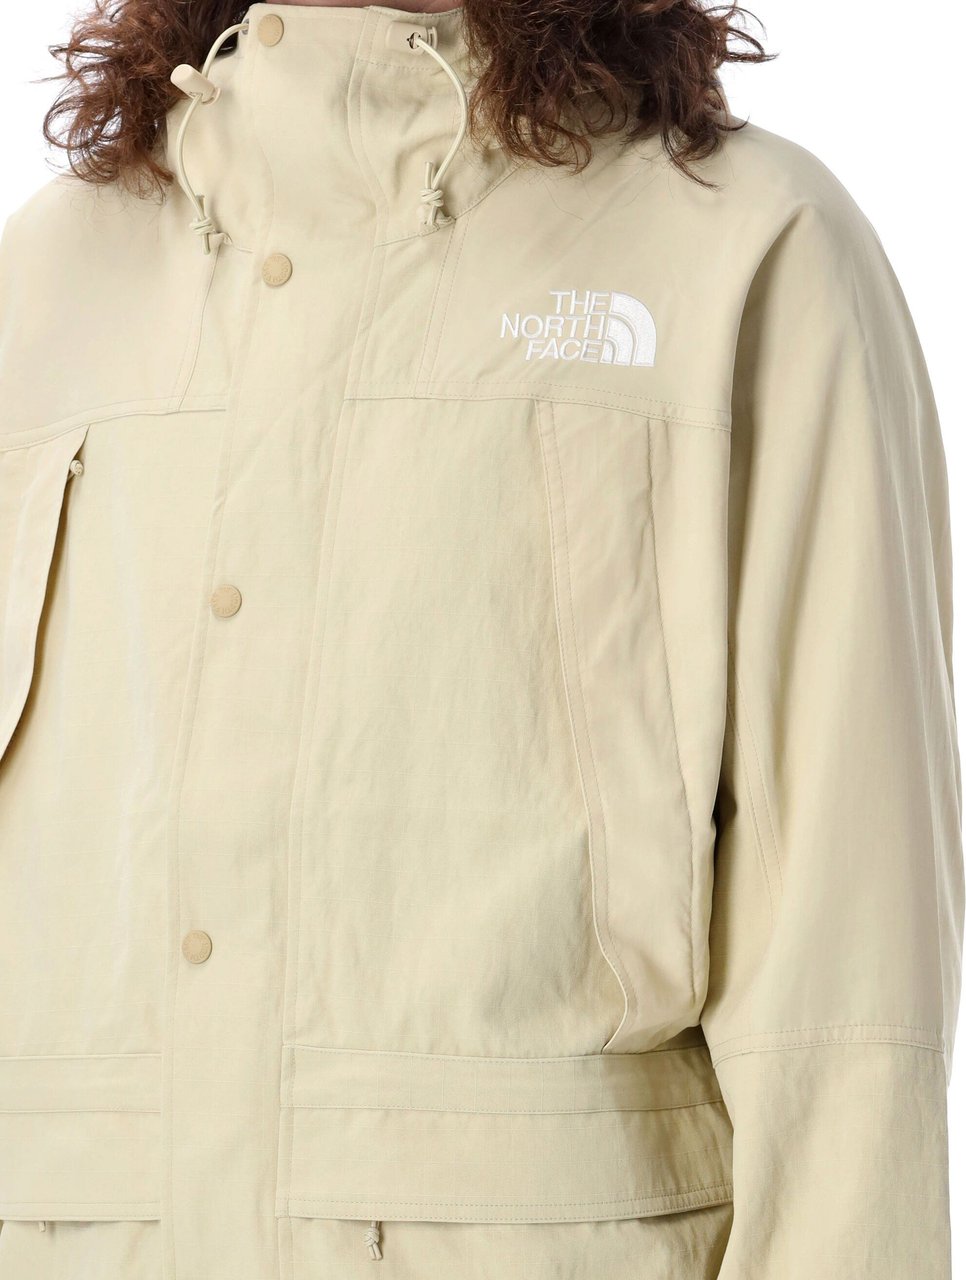 The North Face RIPSTOP MOUNTAIN CARGO JACKET Beige